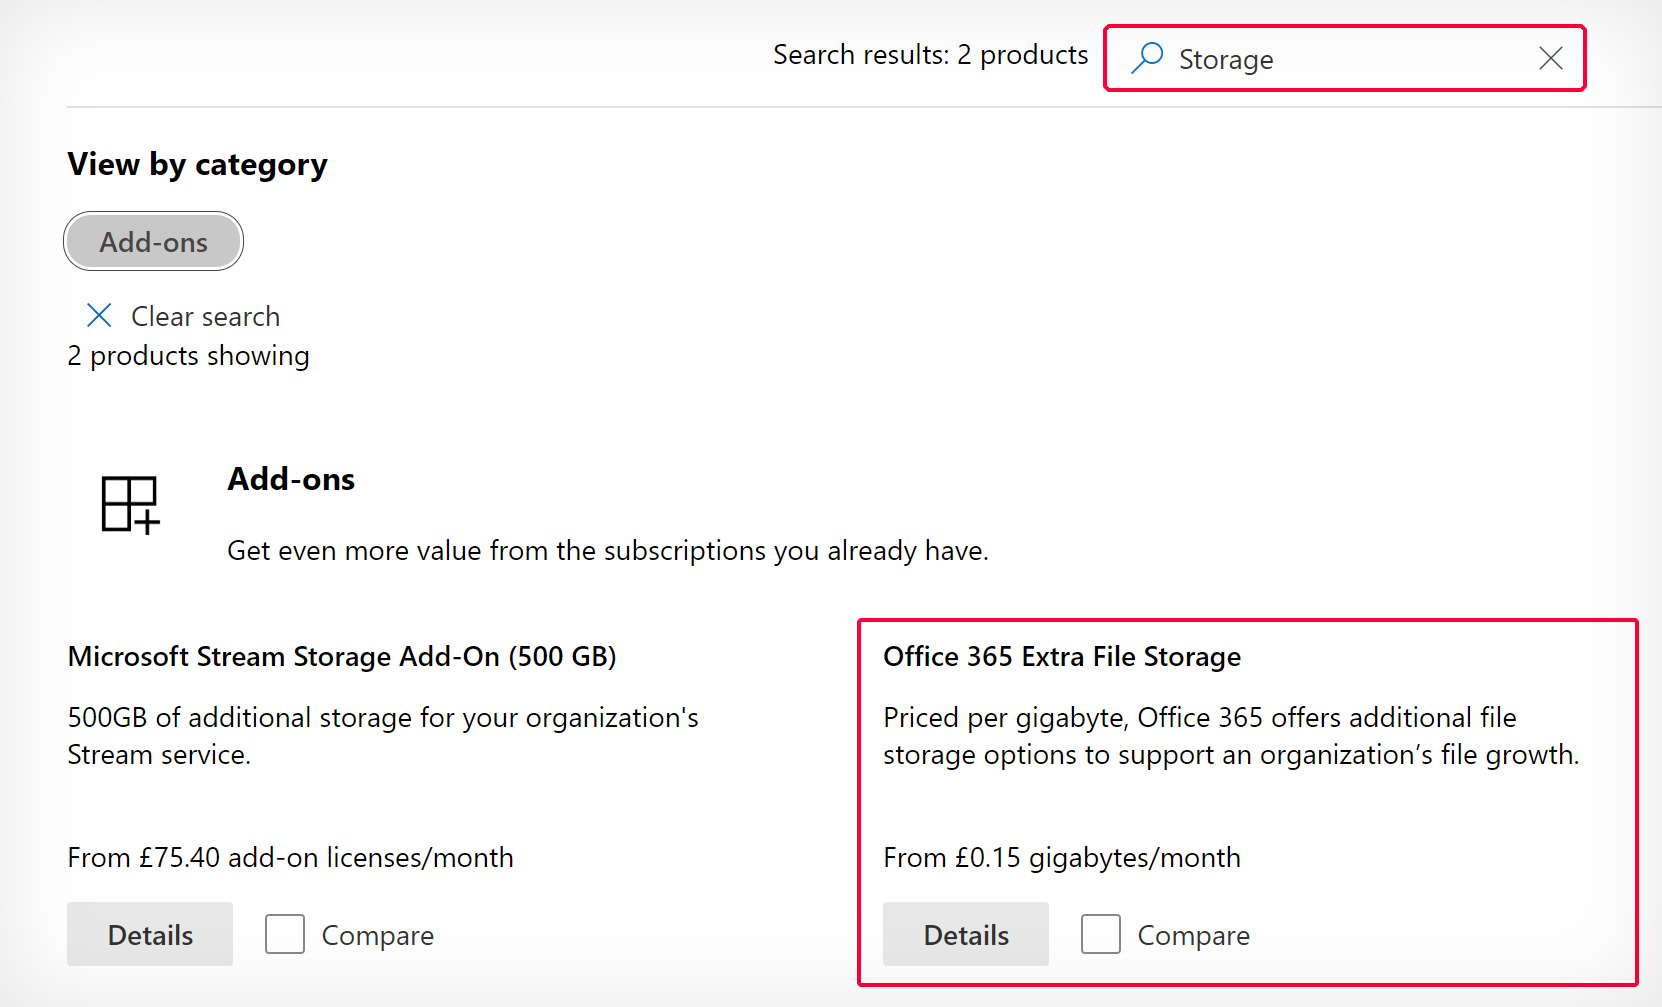 Search "storage" and select Office 365 Extra File Storage